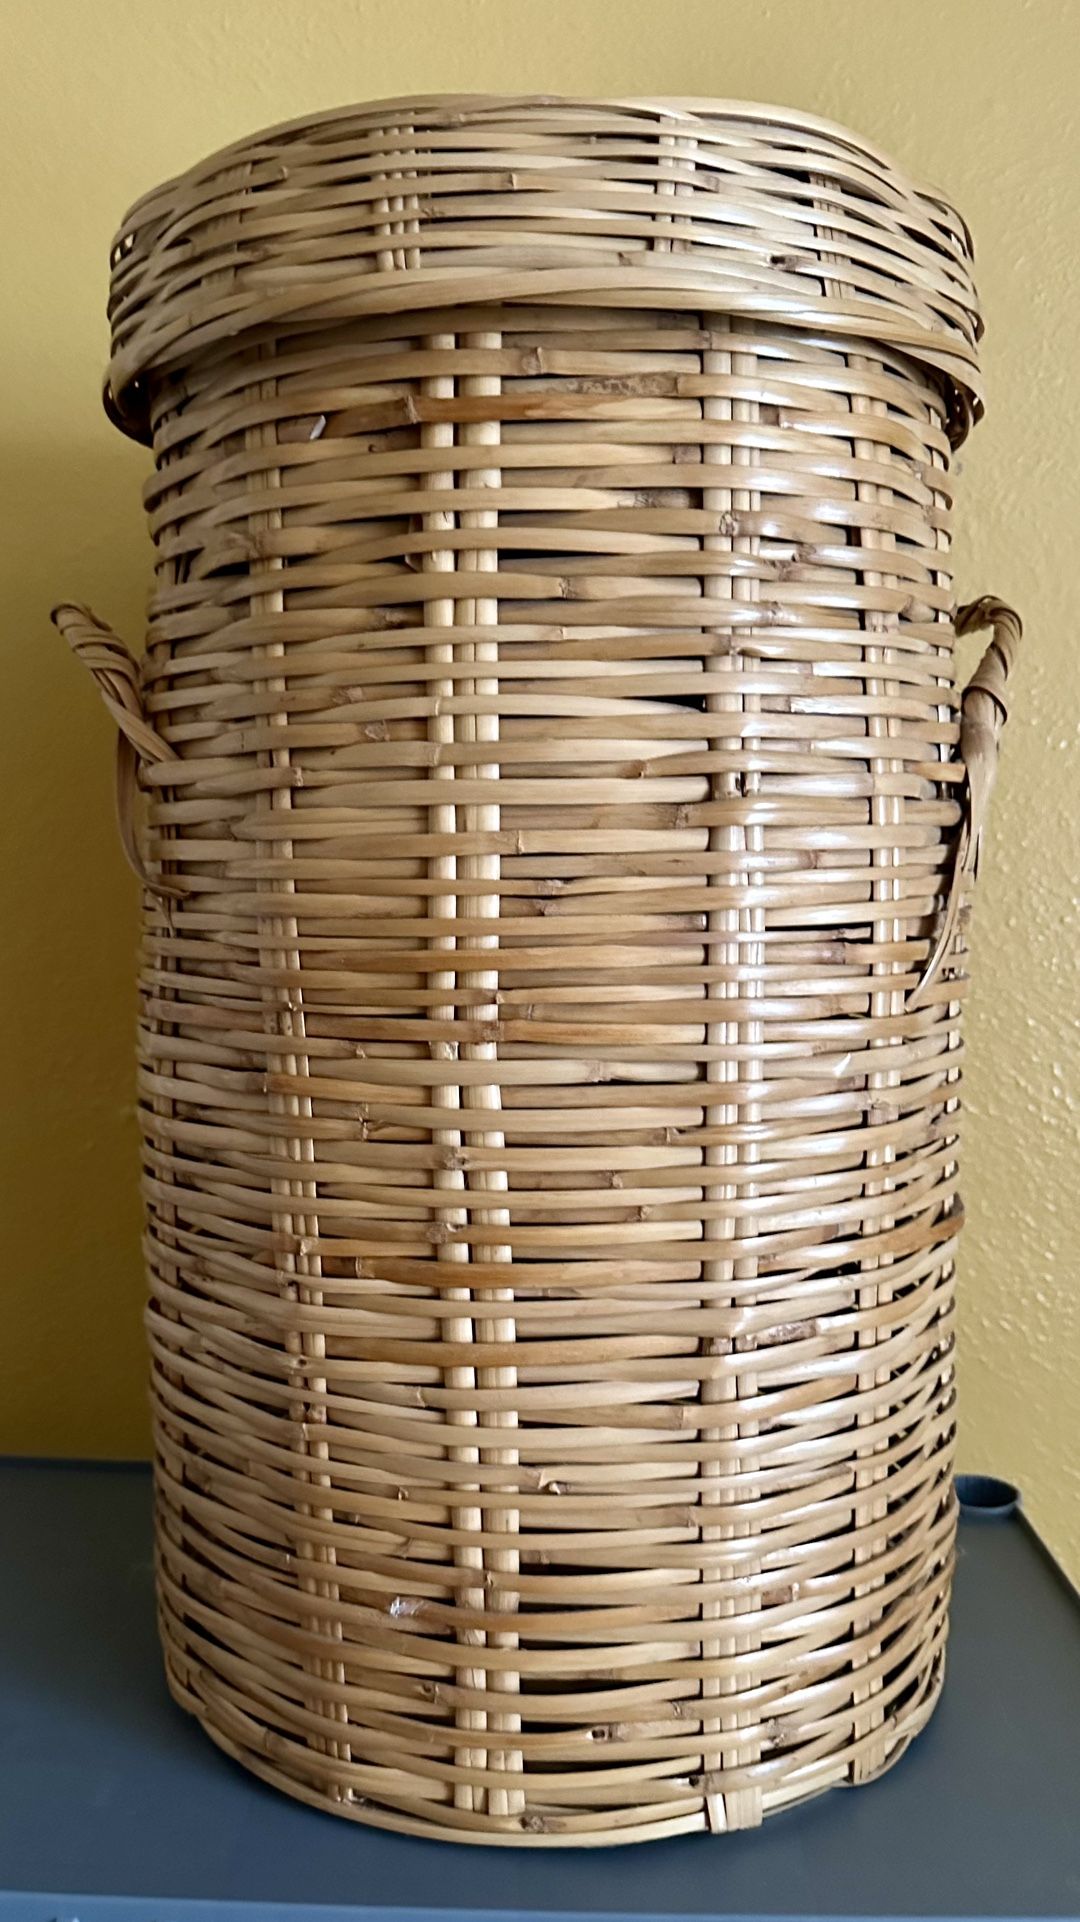 1970s Tall Natural Toned Basket with Lid, 2 Pieces